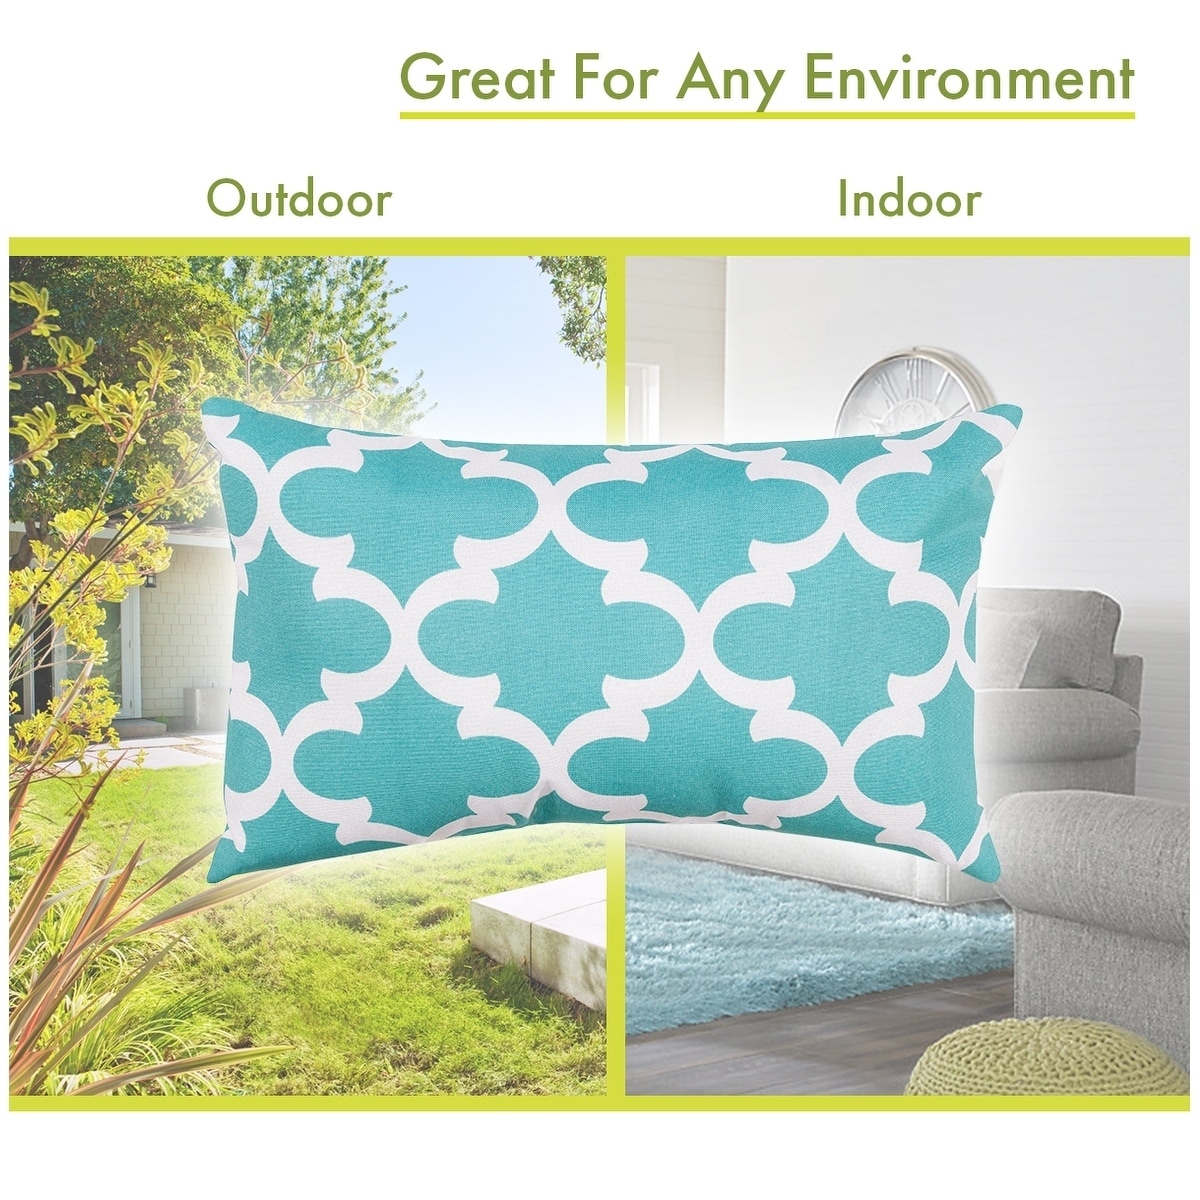 https://ak1.ostkcdn.com/images/products/22277178/Majestic-Home-Goods-Indoor-Outdoor-Trellis-Small-Decorative-Throw-Pillow-20-X-12-741f63d2-284f-4462-bb9e-aa905c3a3257.jpg